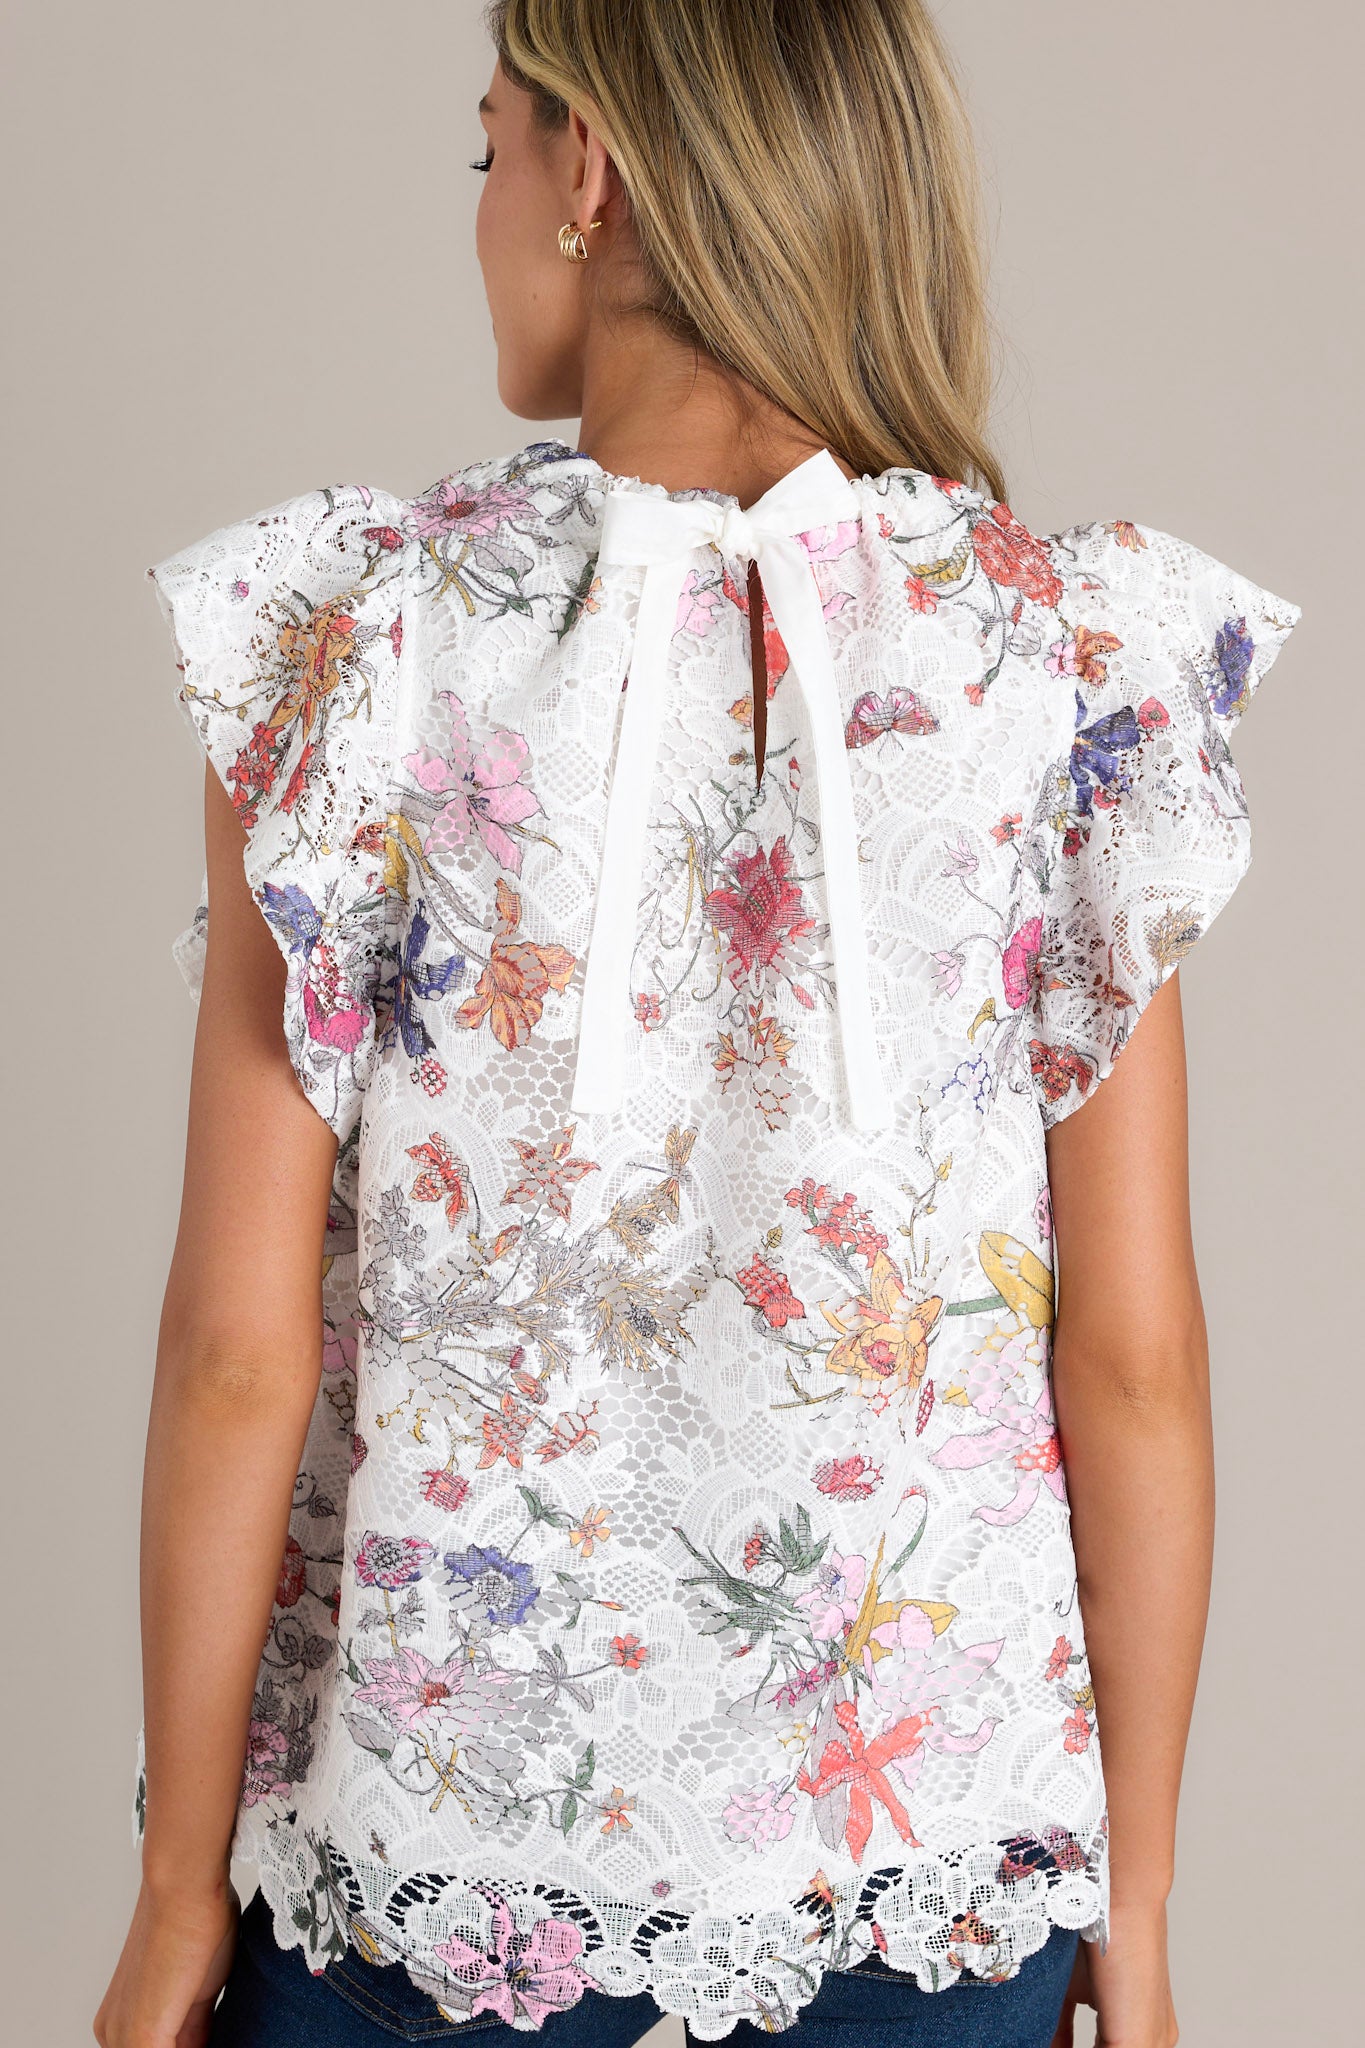 Back view of a white top highlighting the self-tie feature at the back of the neck, floral lace overlay, and ruffled short sleeves.